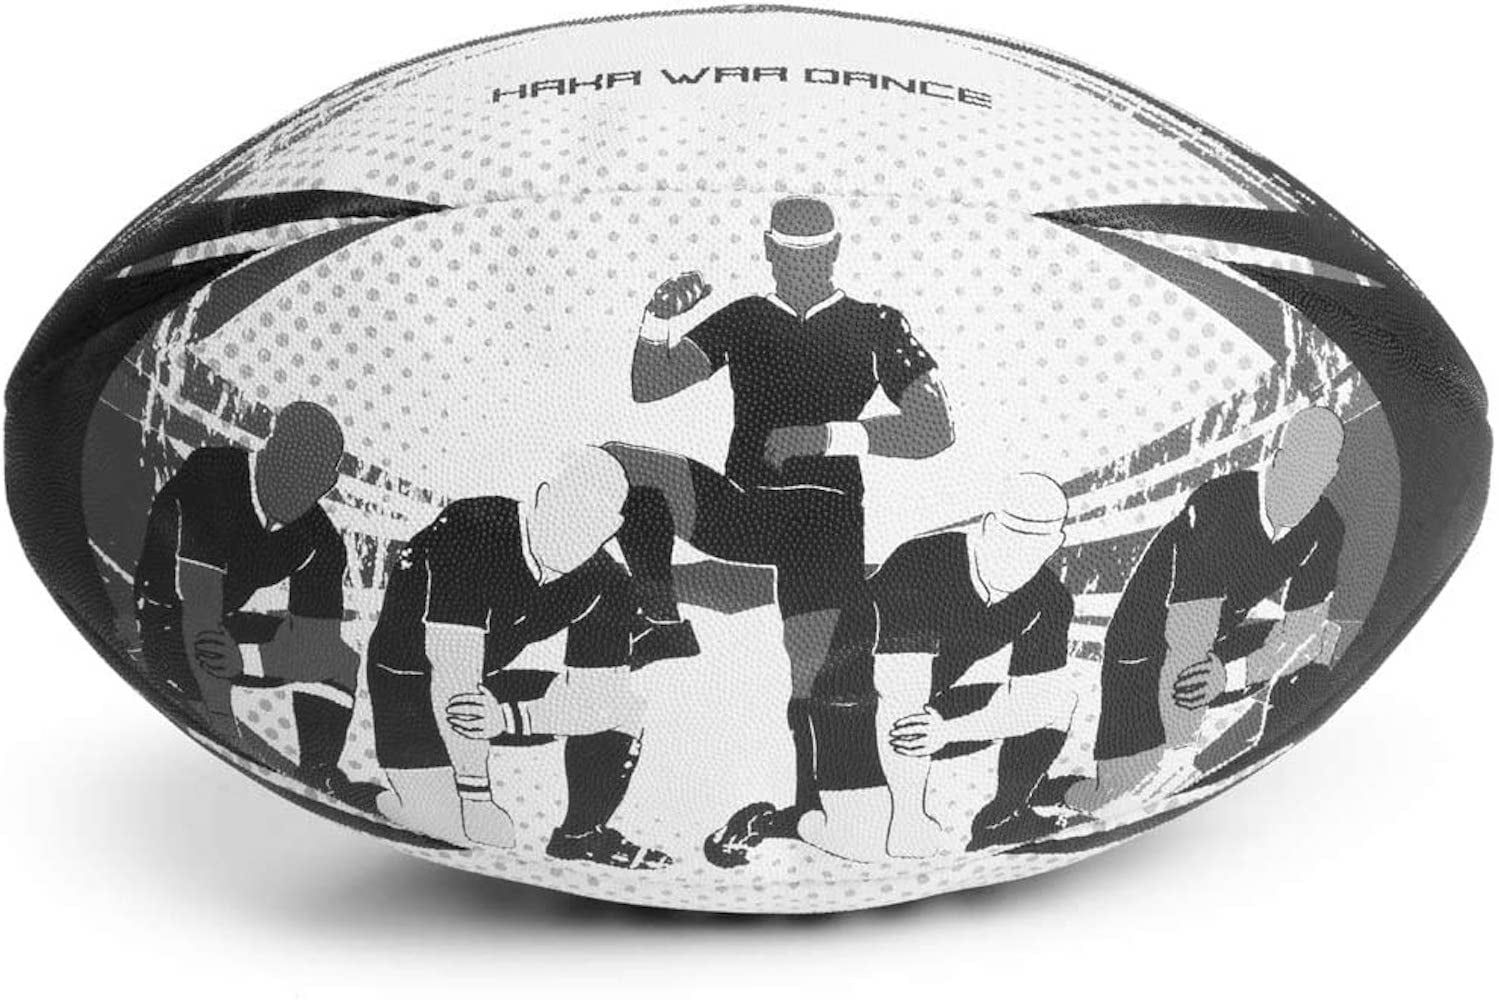 Picture of Brybelly SRUG-002 Haka War Dance Rugby Ball